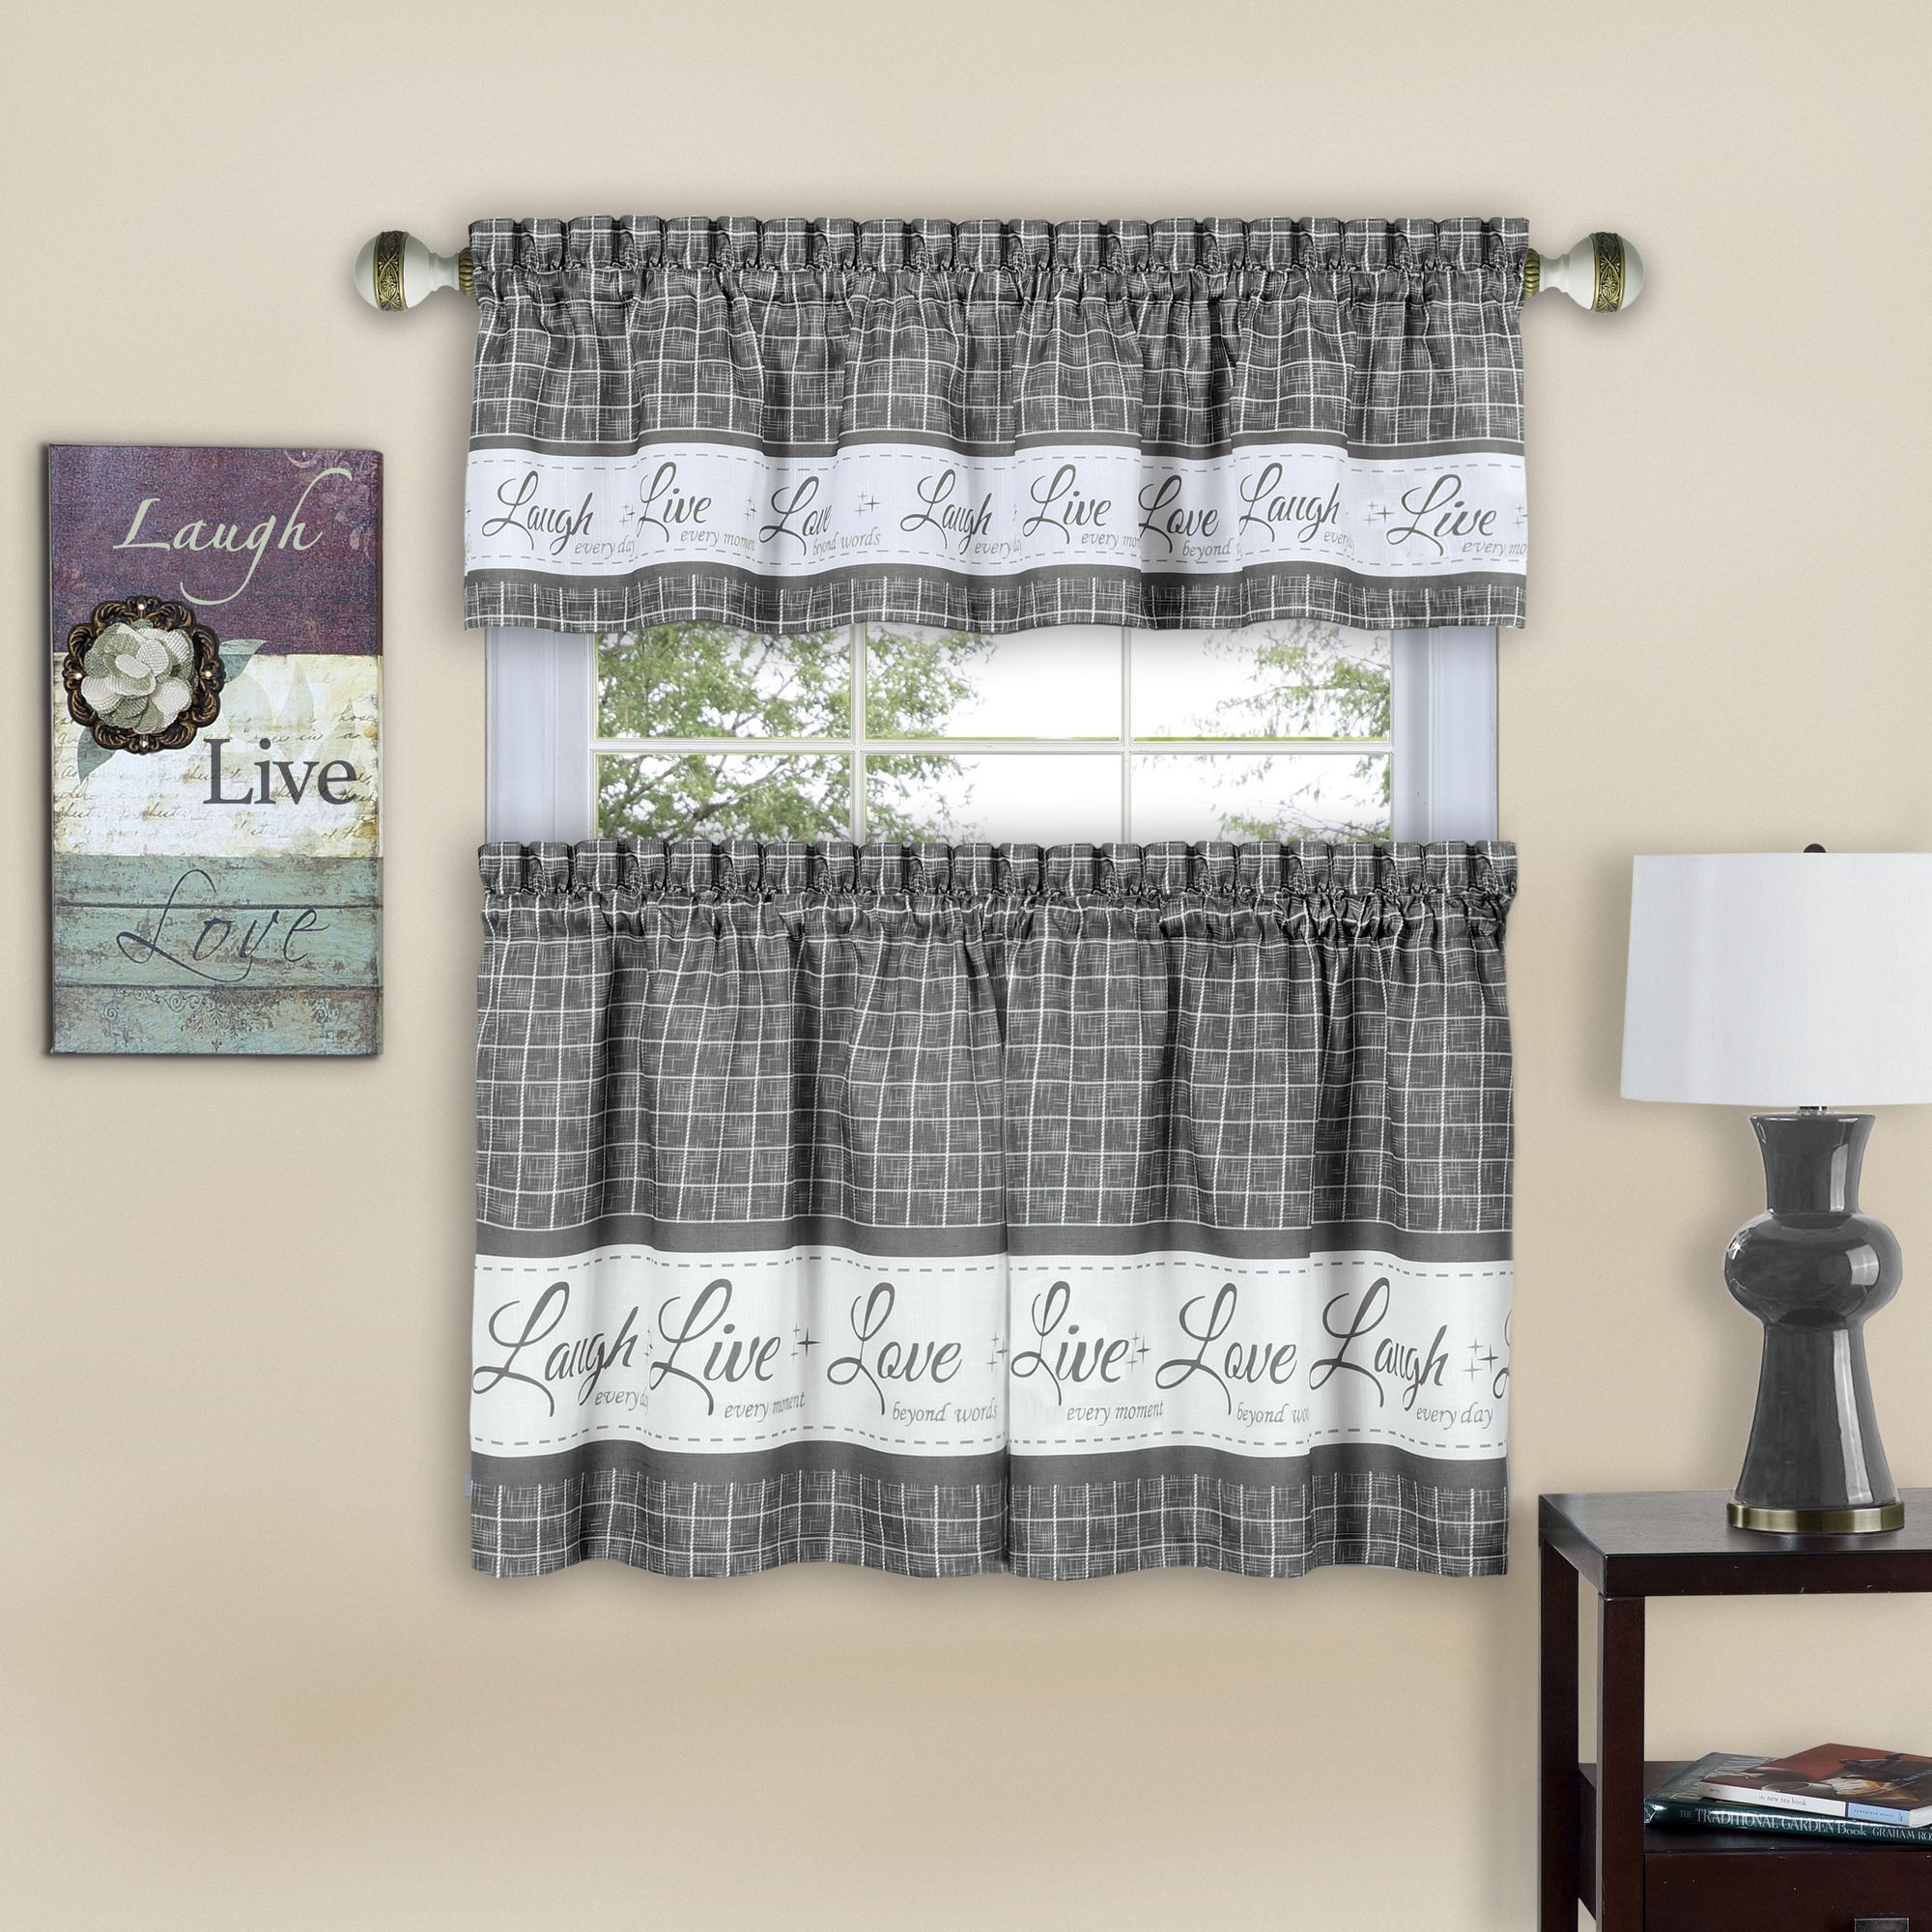 Home In 2019 | Kitchen Curtain Sets, Curtains, Kitchen Inside Floral Lace Rod Pocket Kitchen Curtain Valance And Tiers Sets (View 4 of 20)